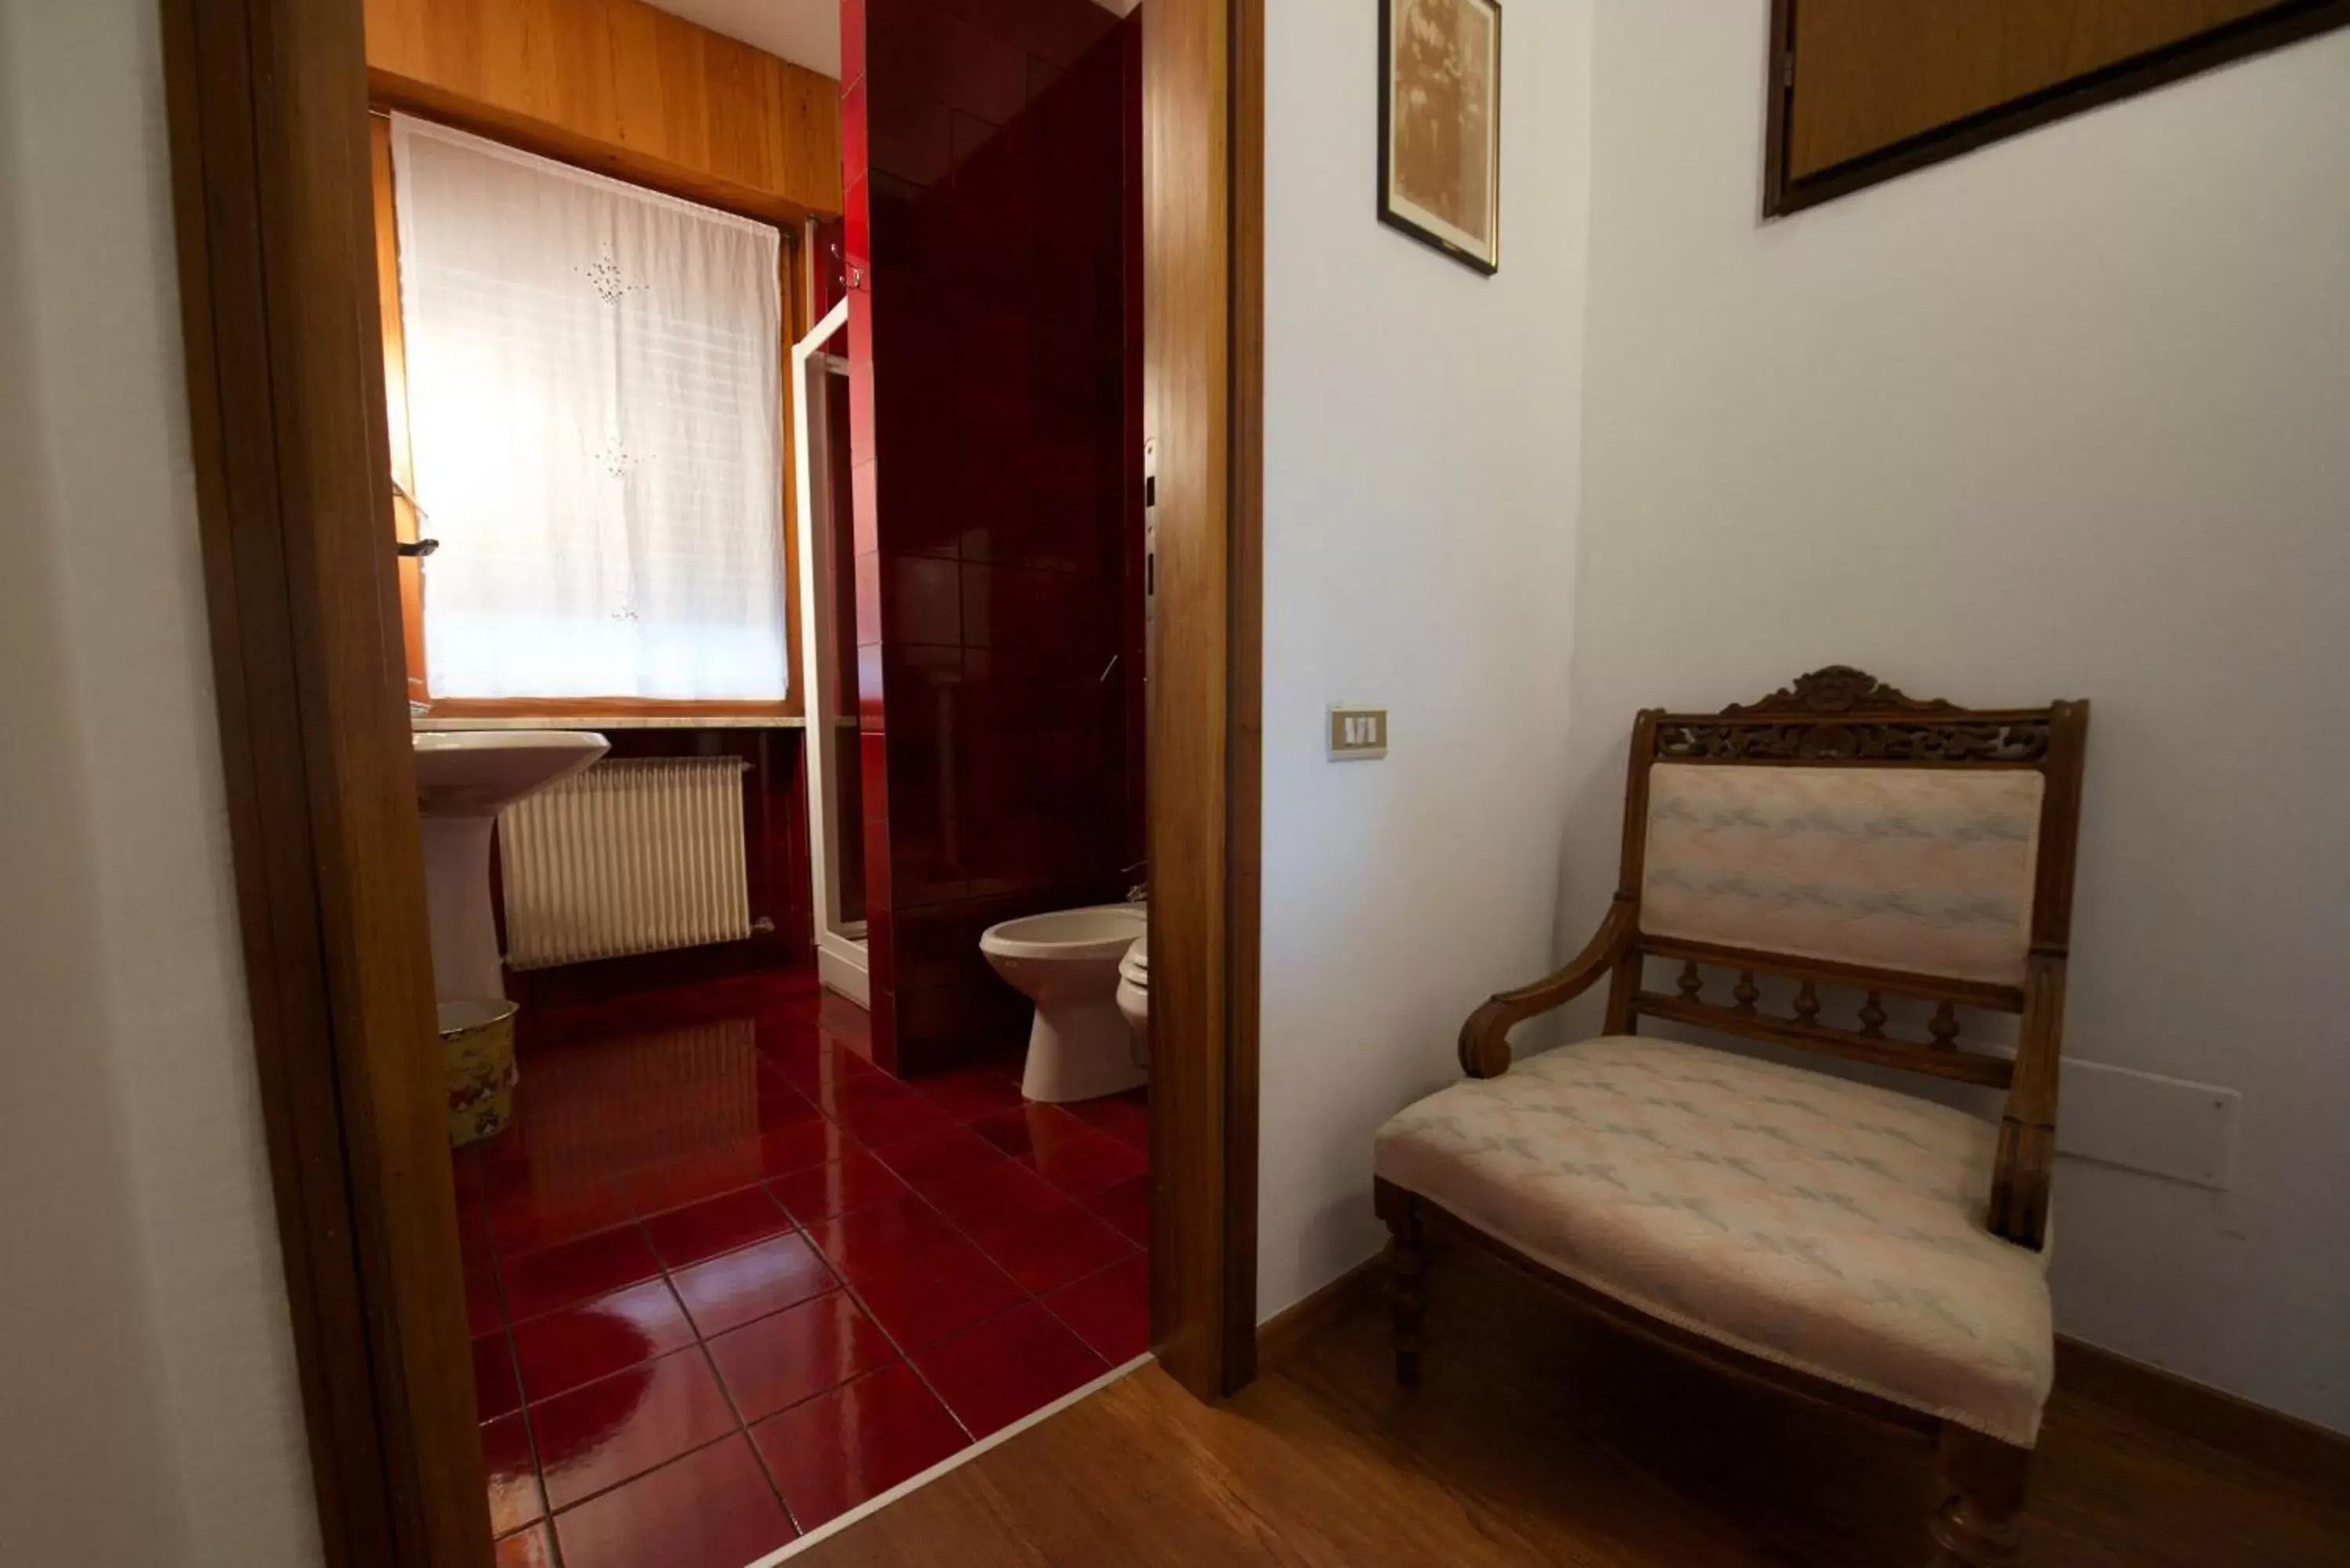 Room Photo in Marzola